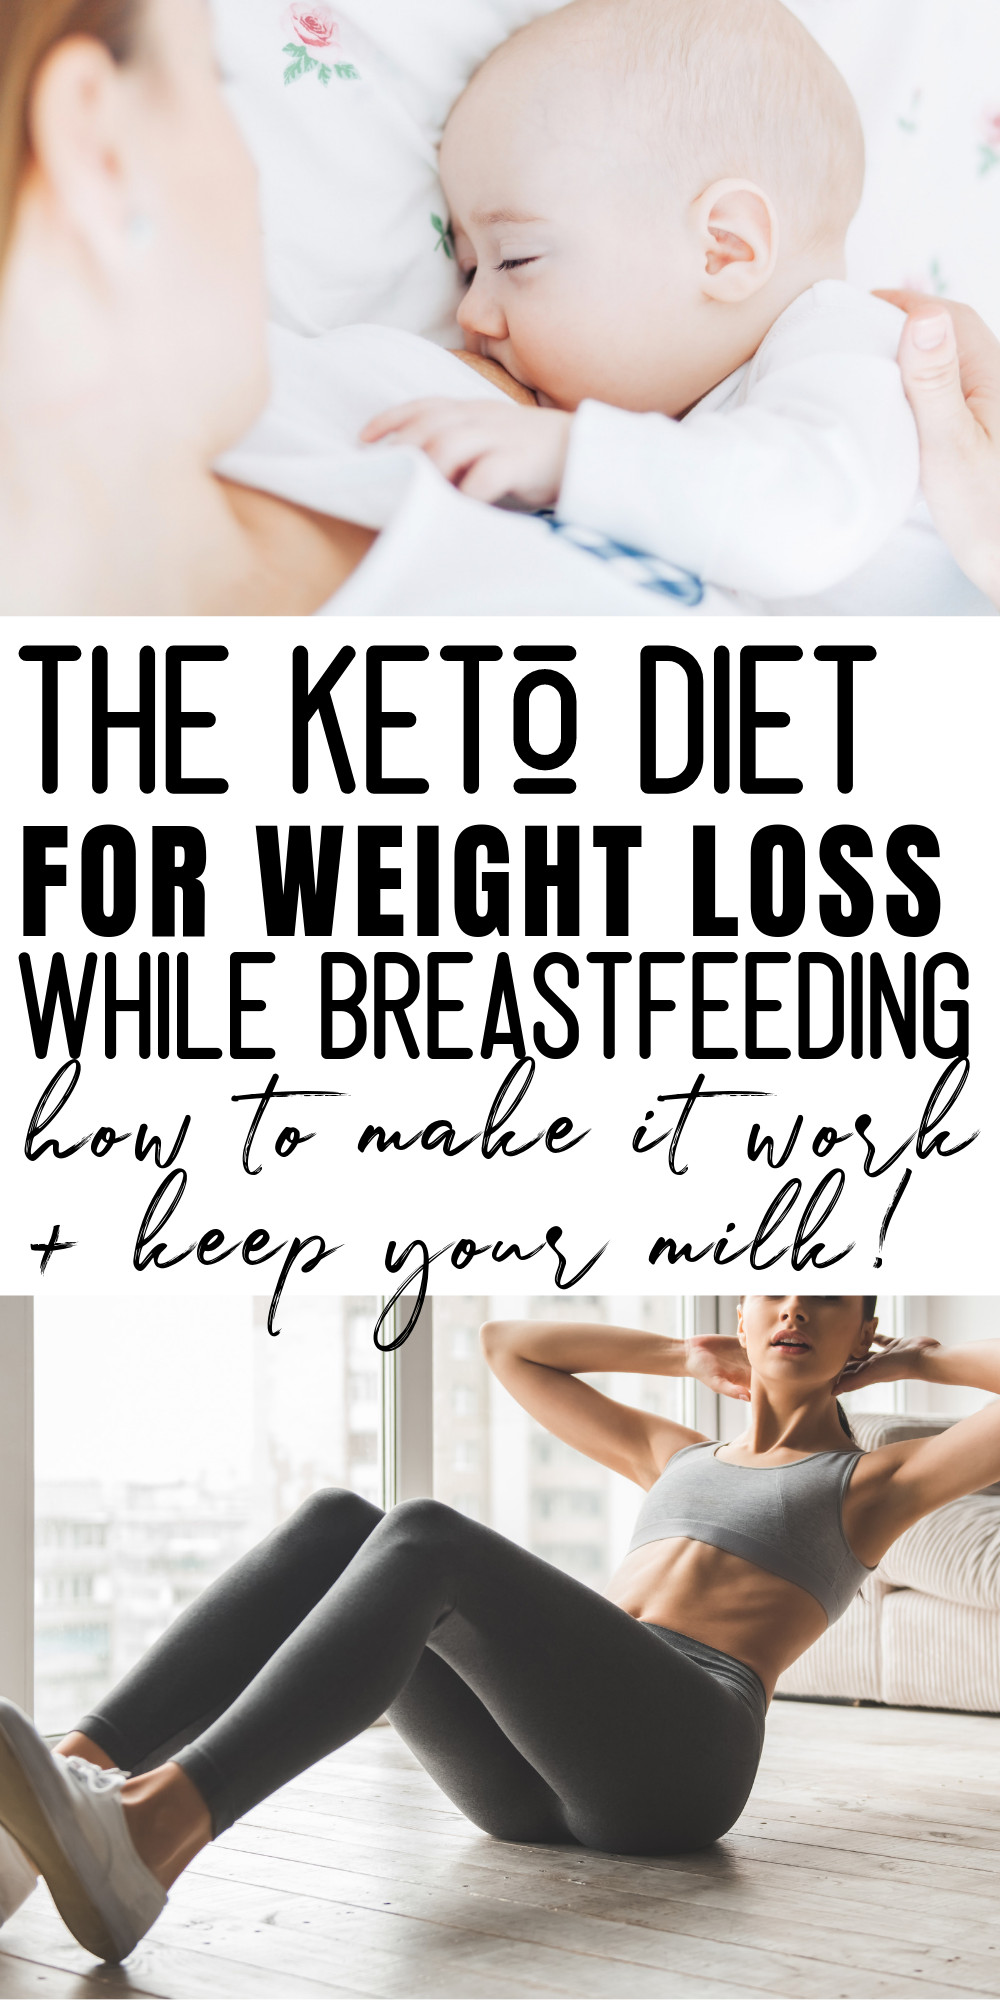 Keto Diet While Breastfeeding
 Modifications You Need To Make To Your Keto Diet While